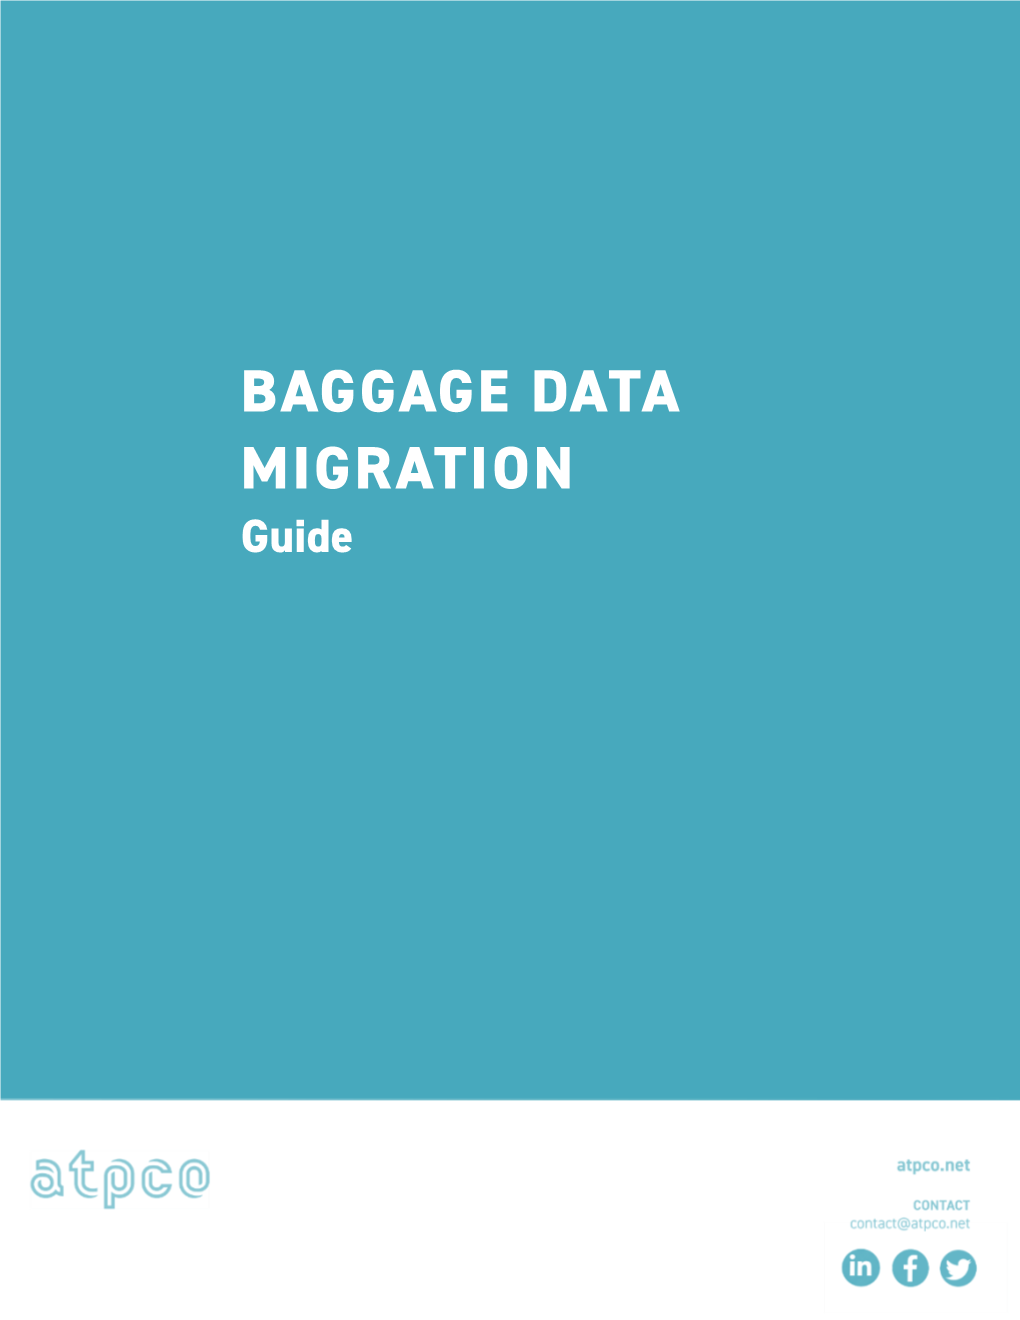 BAGGAGE DATA MIGRATION Guide